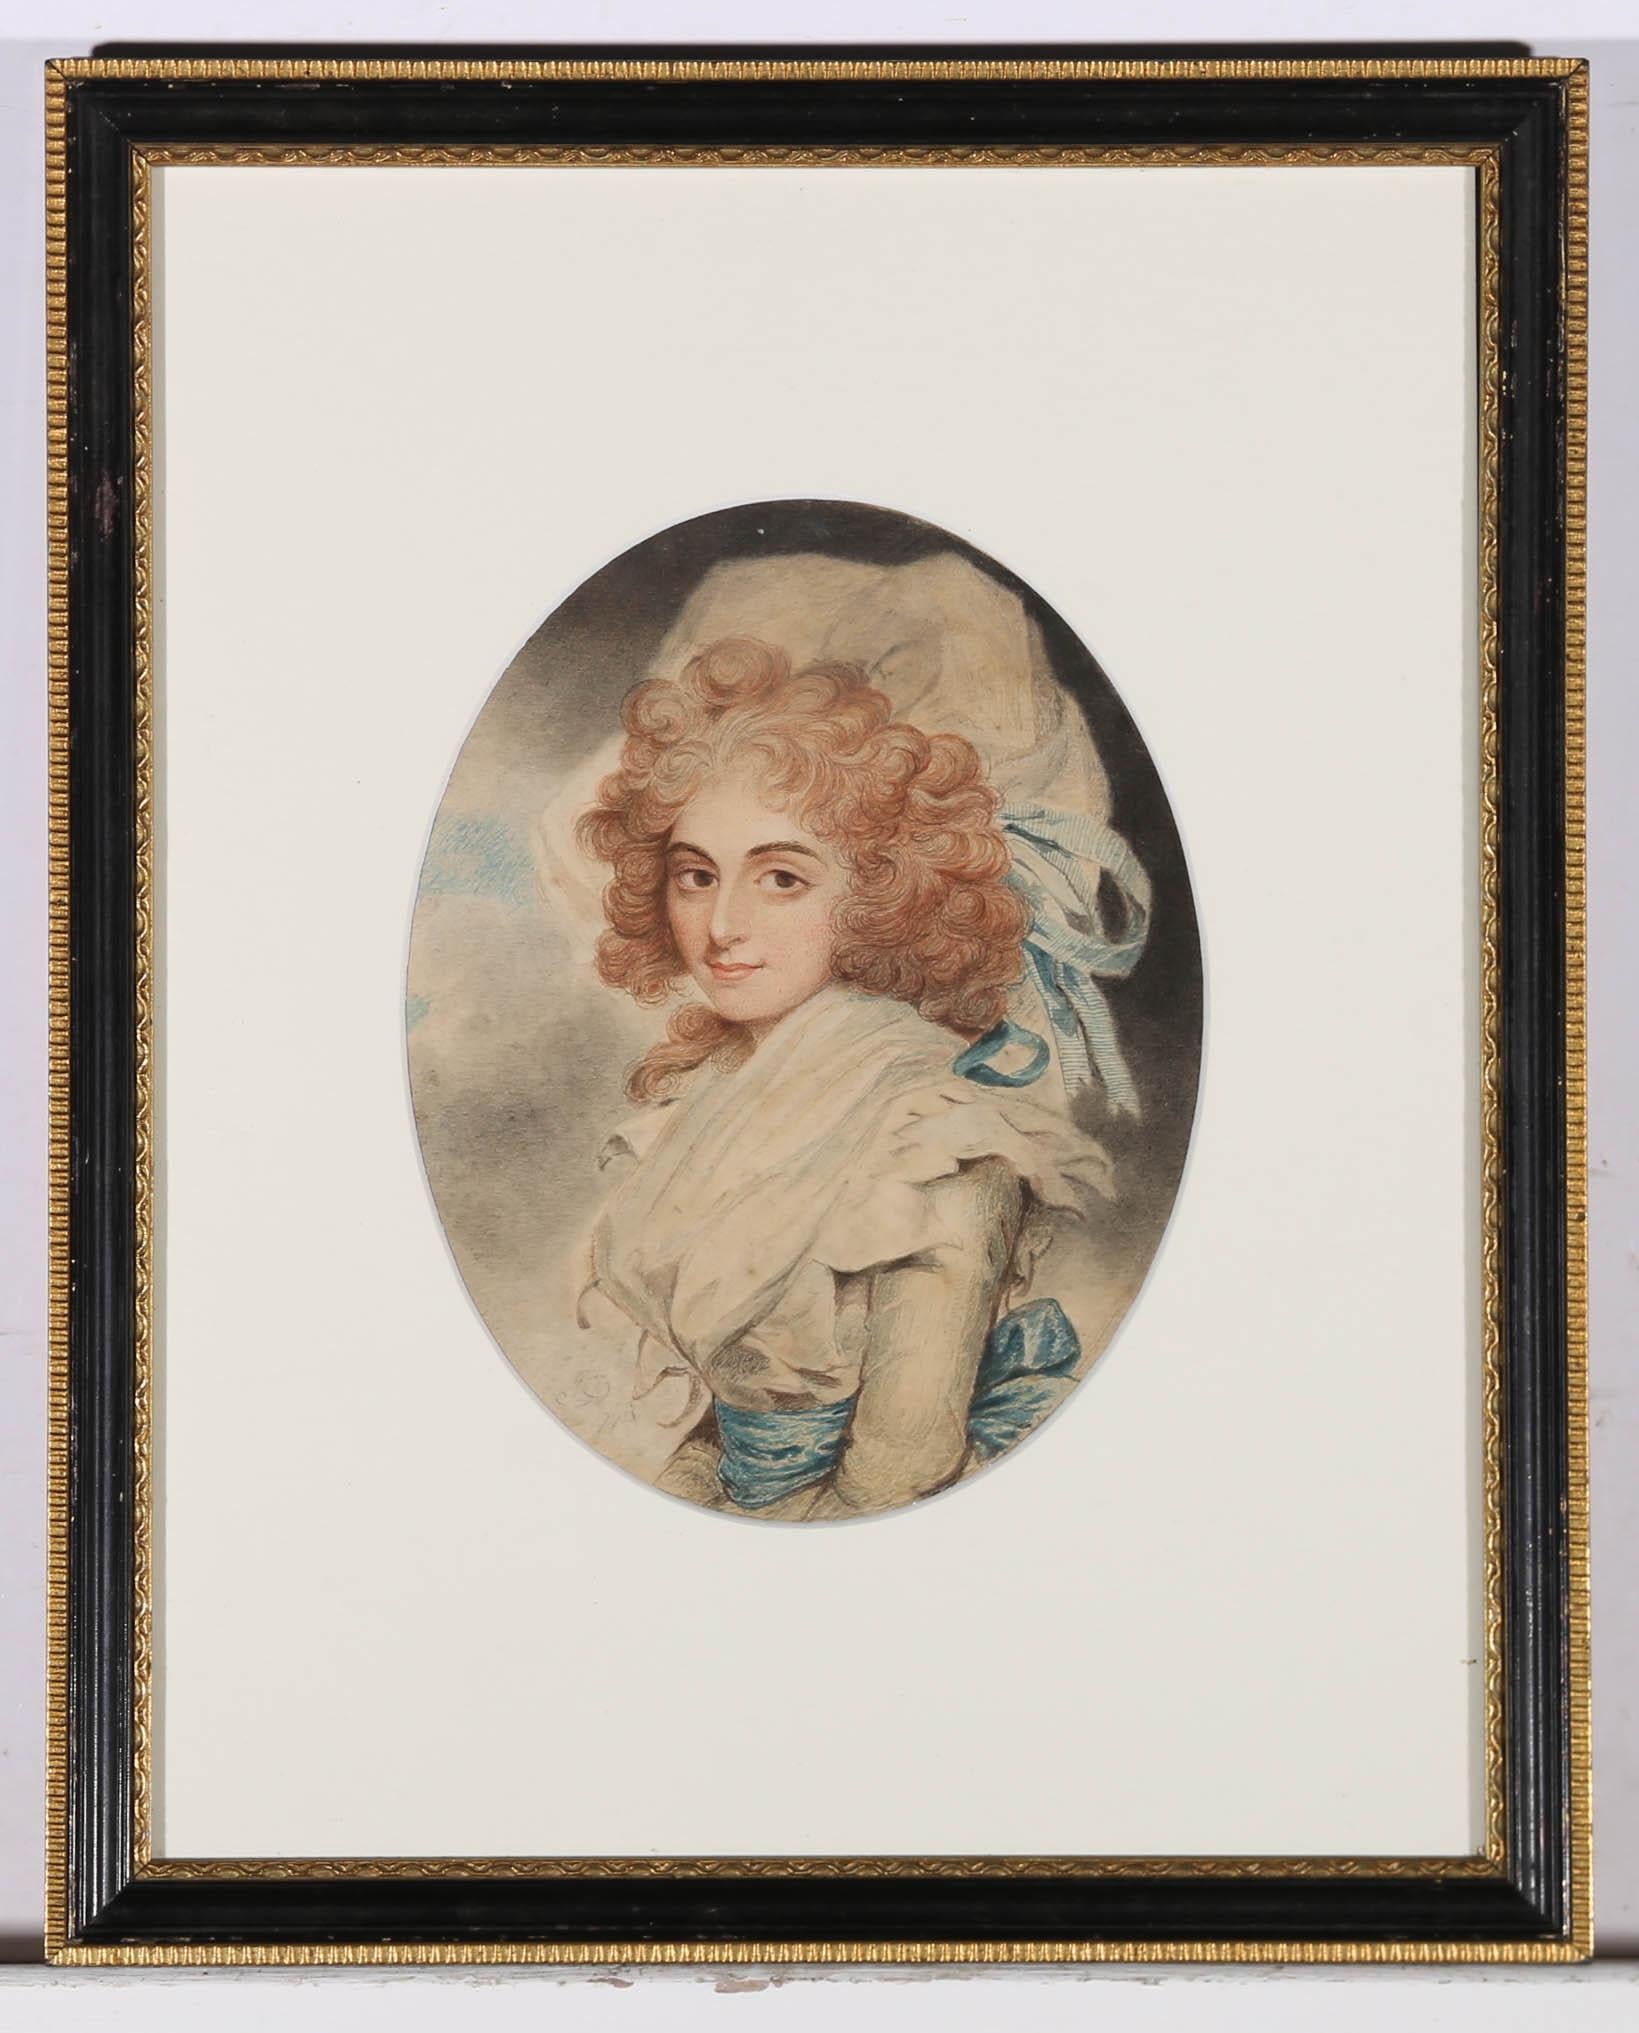 This accomplished watercolours is a fine copy of John Downman's portrait of Sarah Siddons. Painted in the early 19th century, watercolours was a contemporary study of Downman's work. The original watercolours was commissioned by the 3rd Duke of